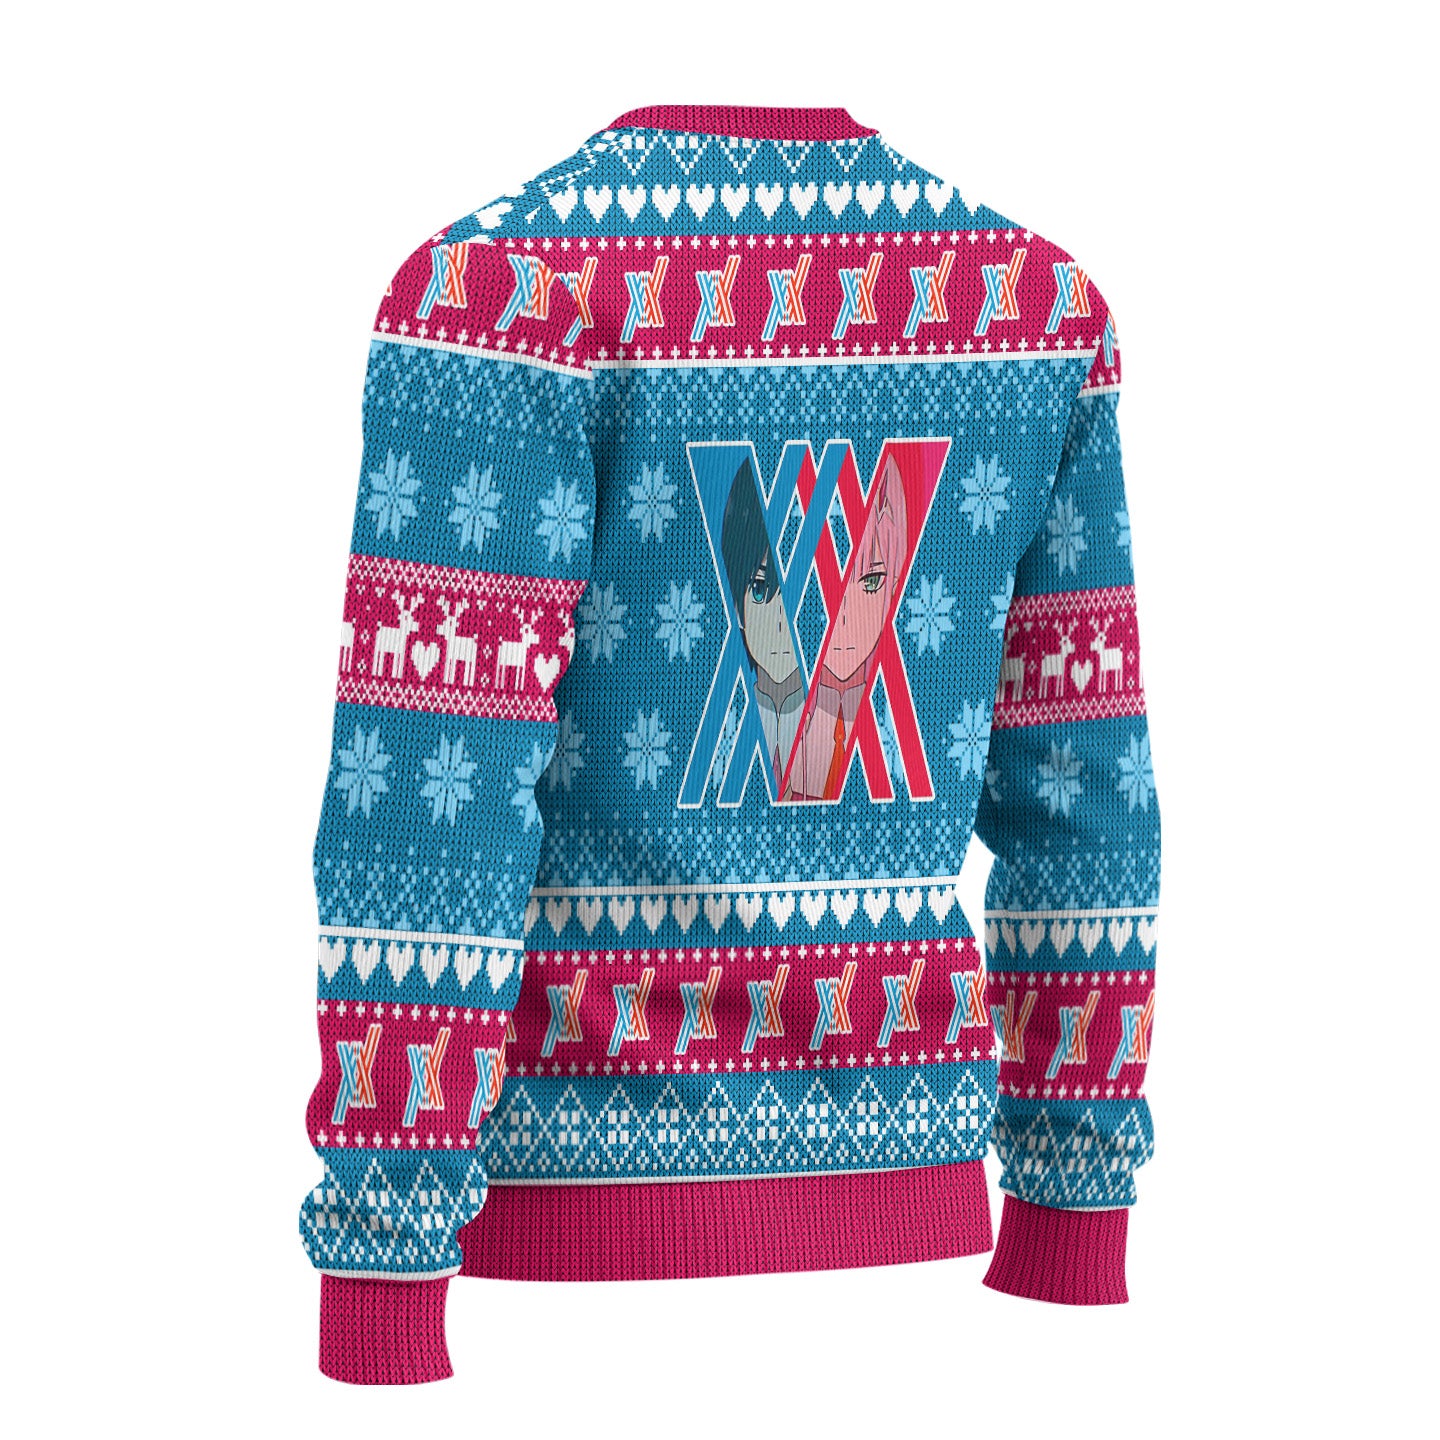 Darling In The Franxx Anime Ugly Christmas Sweater Custom New Design